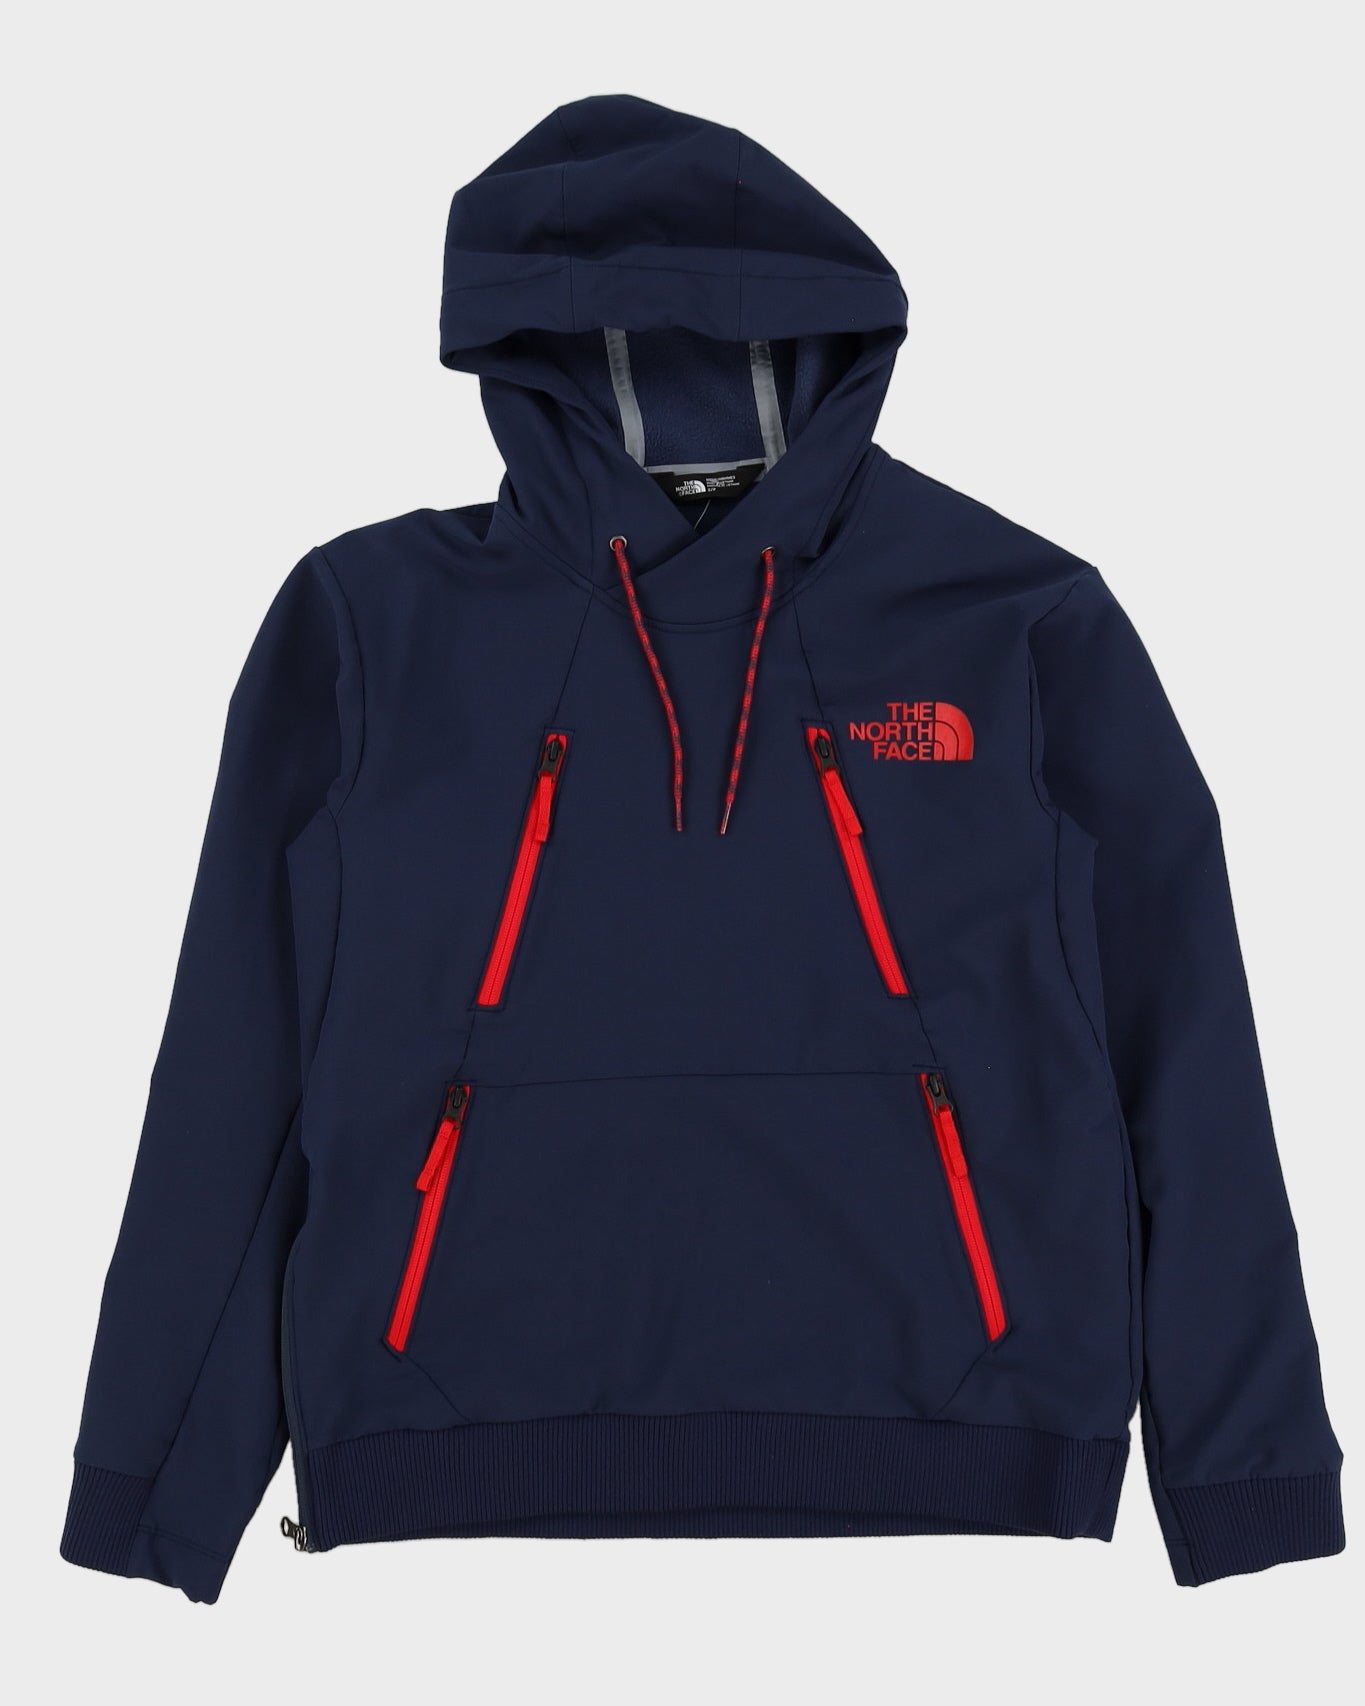 The North Face Blue Fleece Lined Hoodie - S